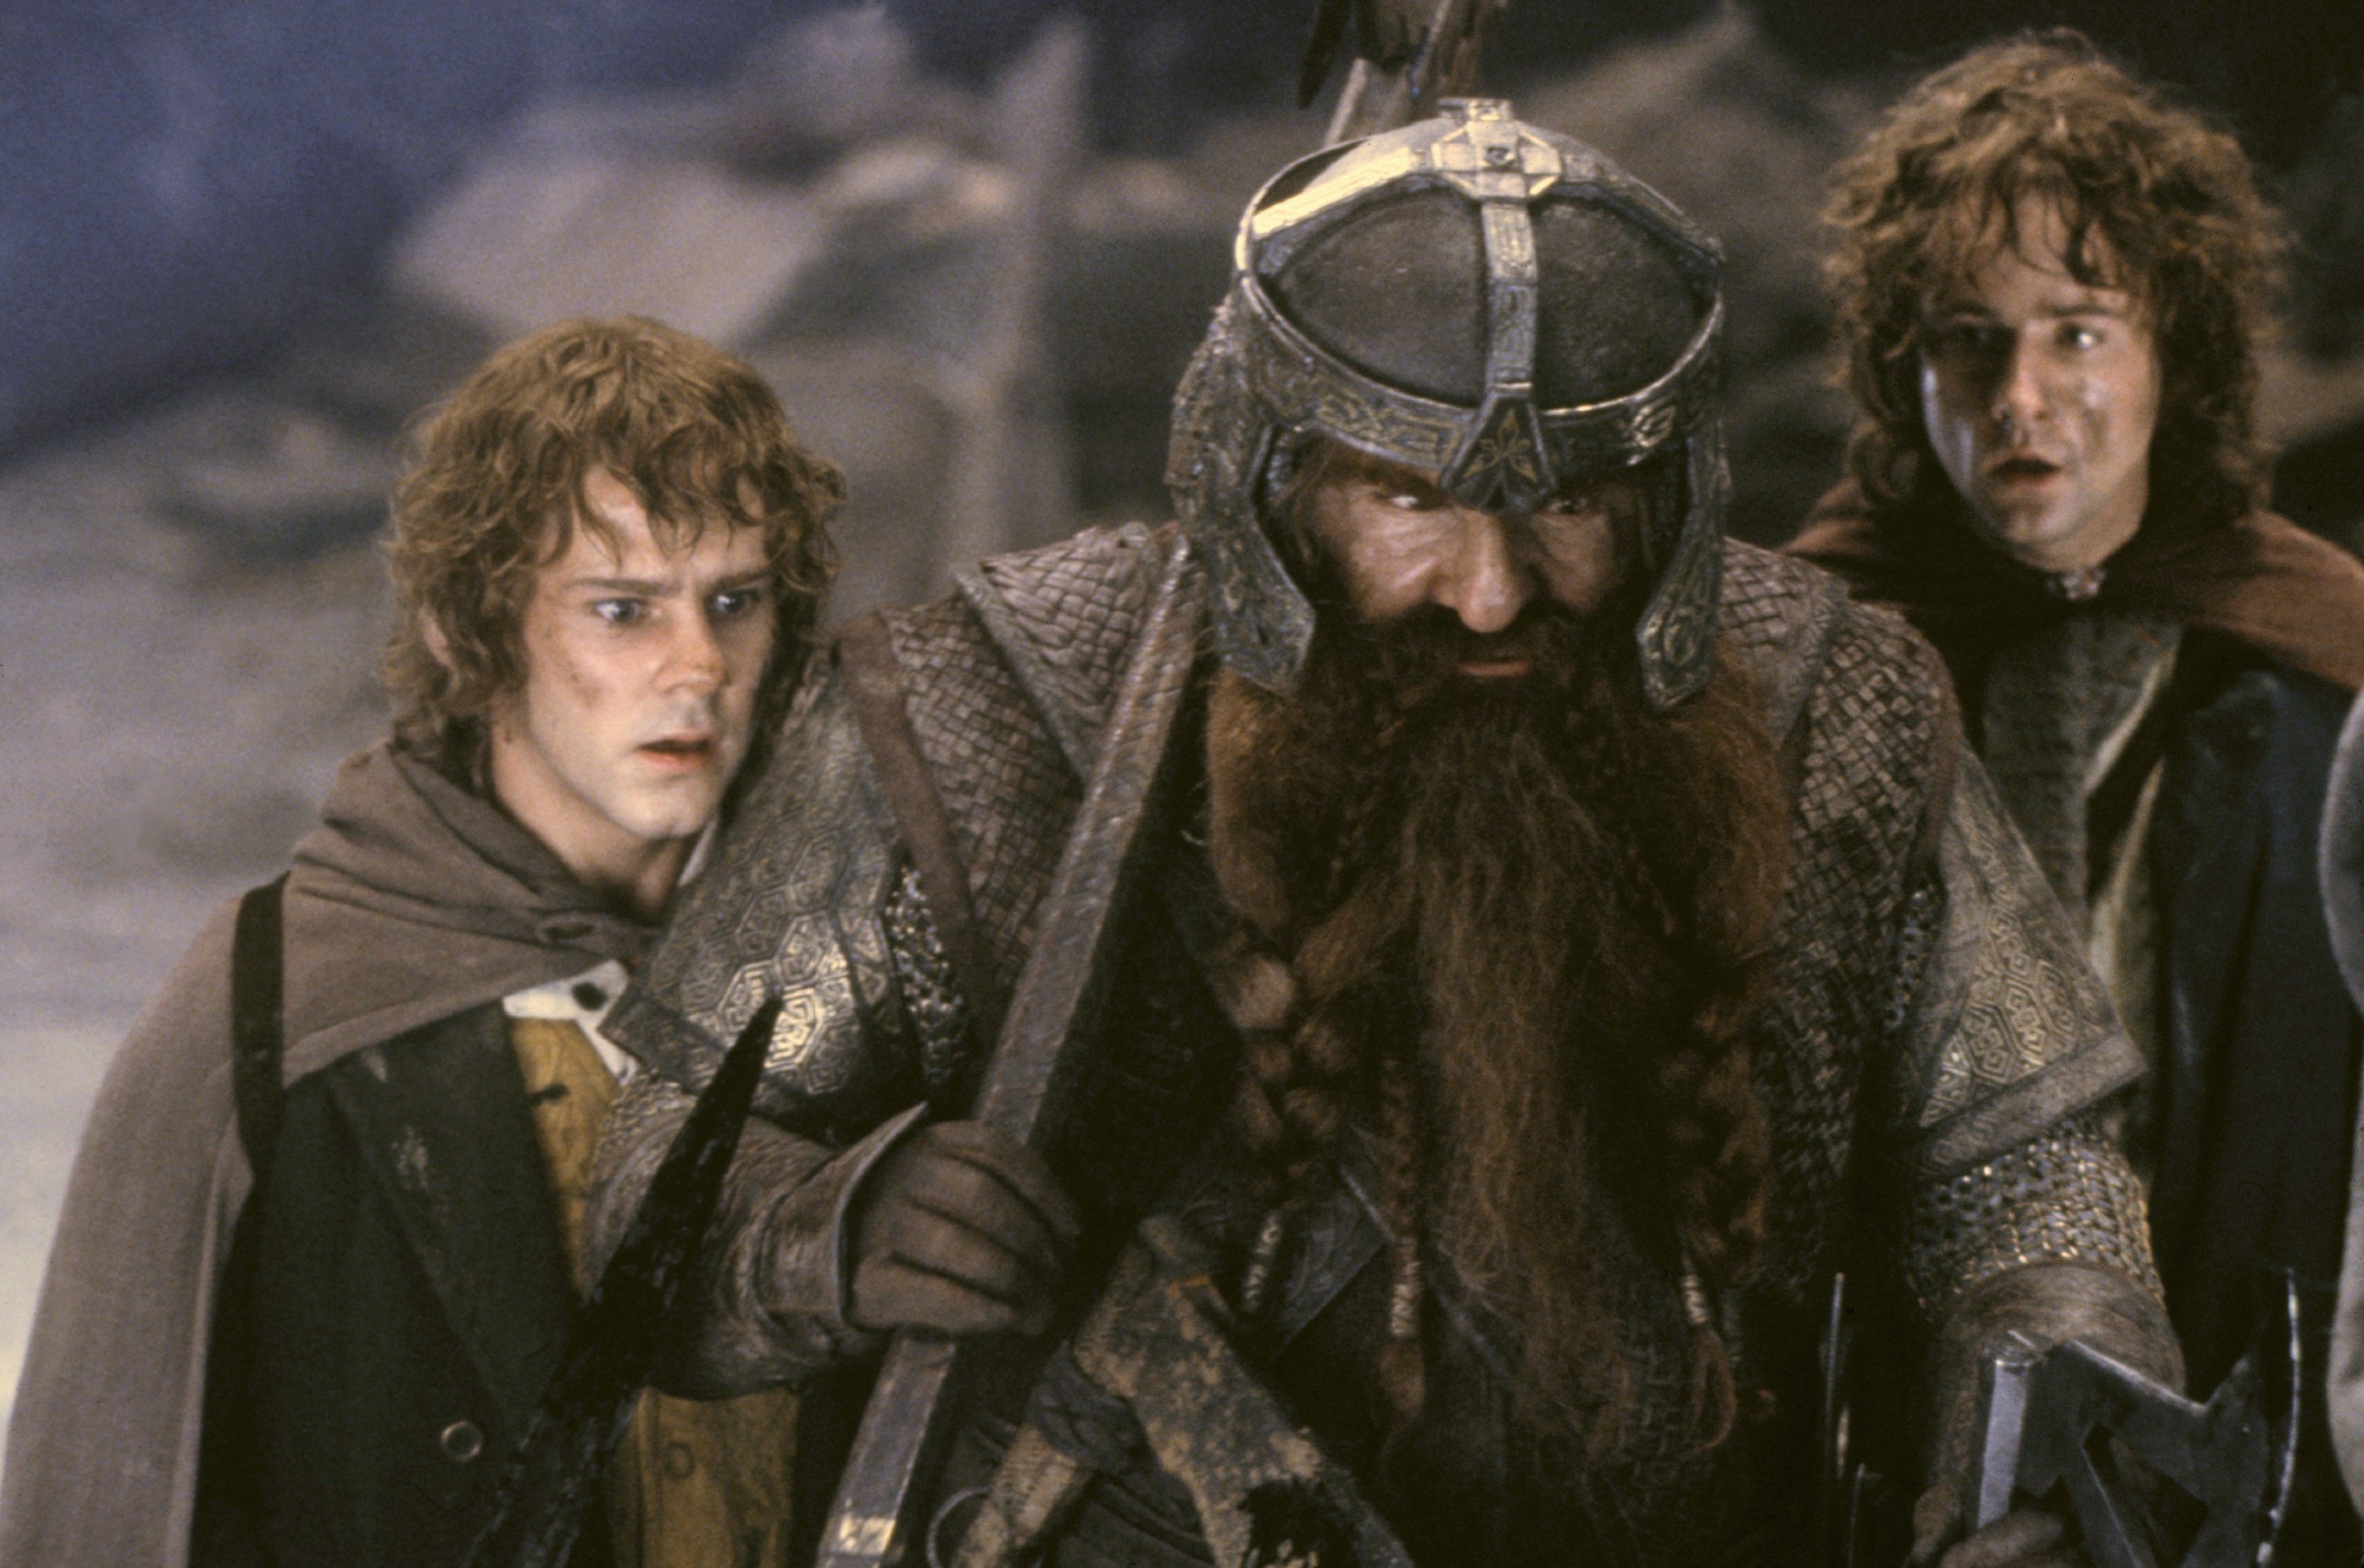 movie, the lord of the rings: the fellowship of the ring, gimli, john rhys davies, merry brandybuck, peregrin took, the lord of the rings